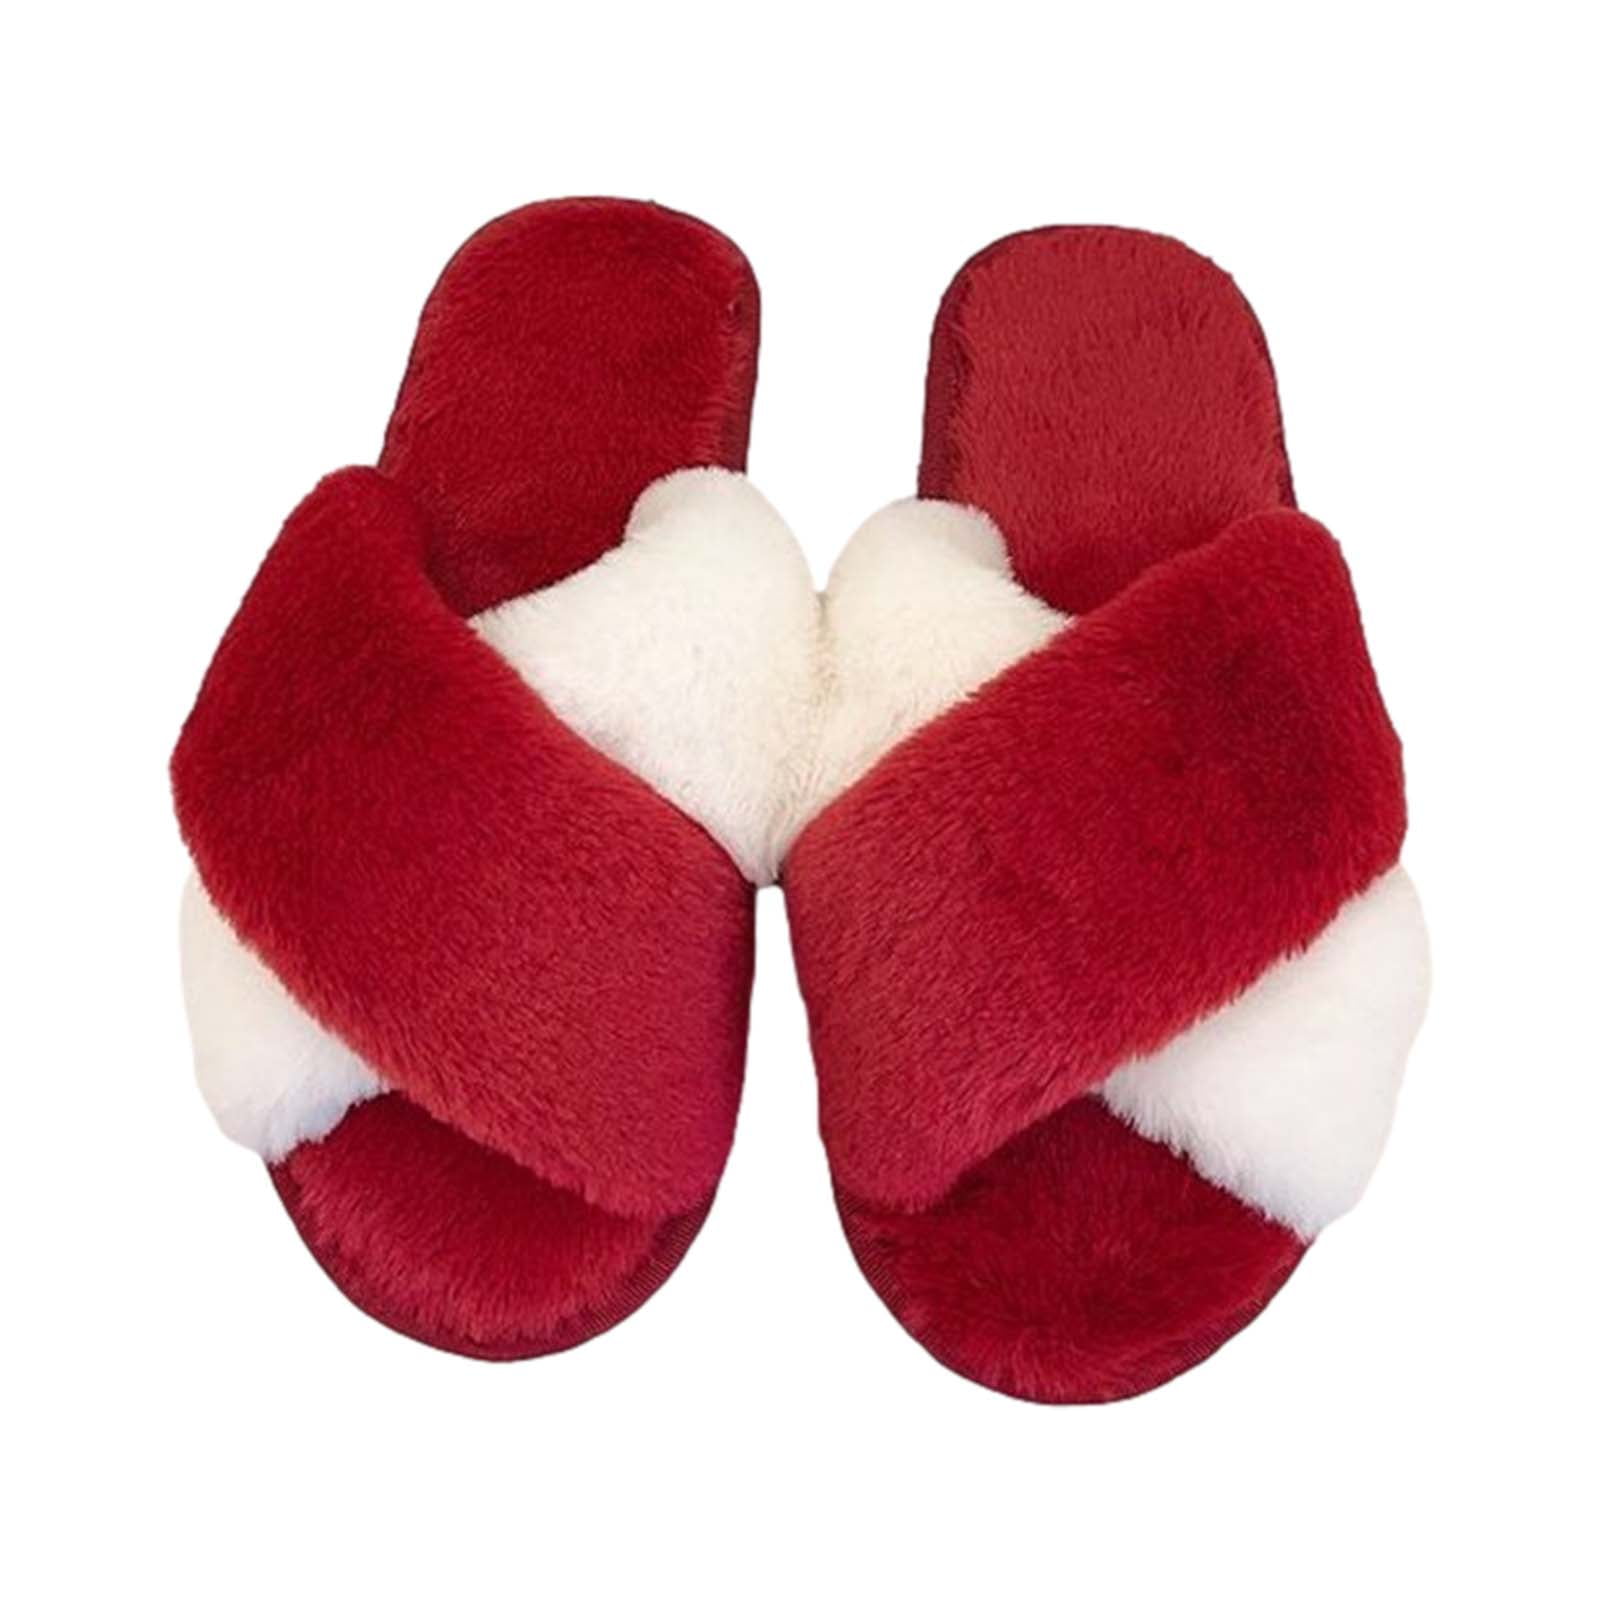 Women＇s Cross Band Slippers Color contrast Soft Plush Furry Shoes ...